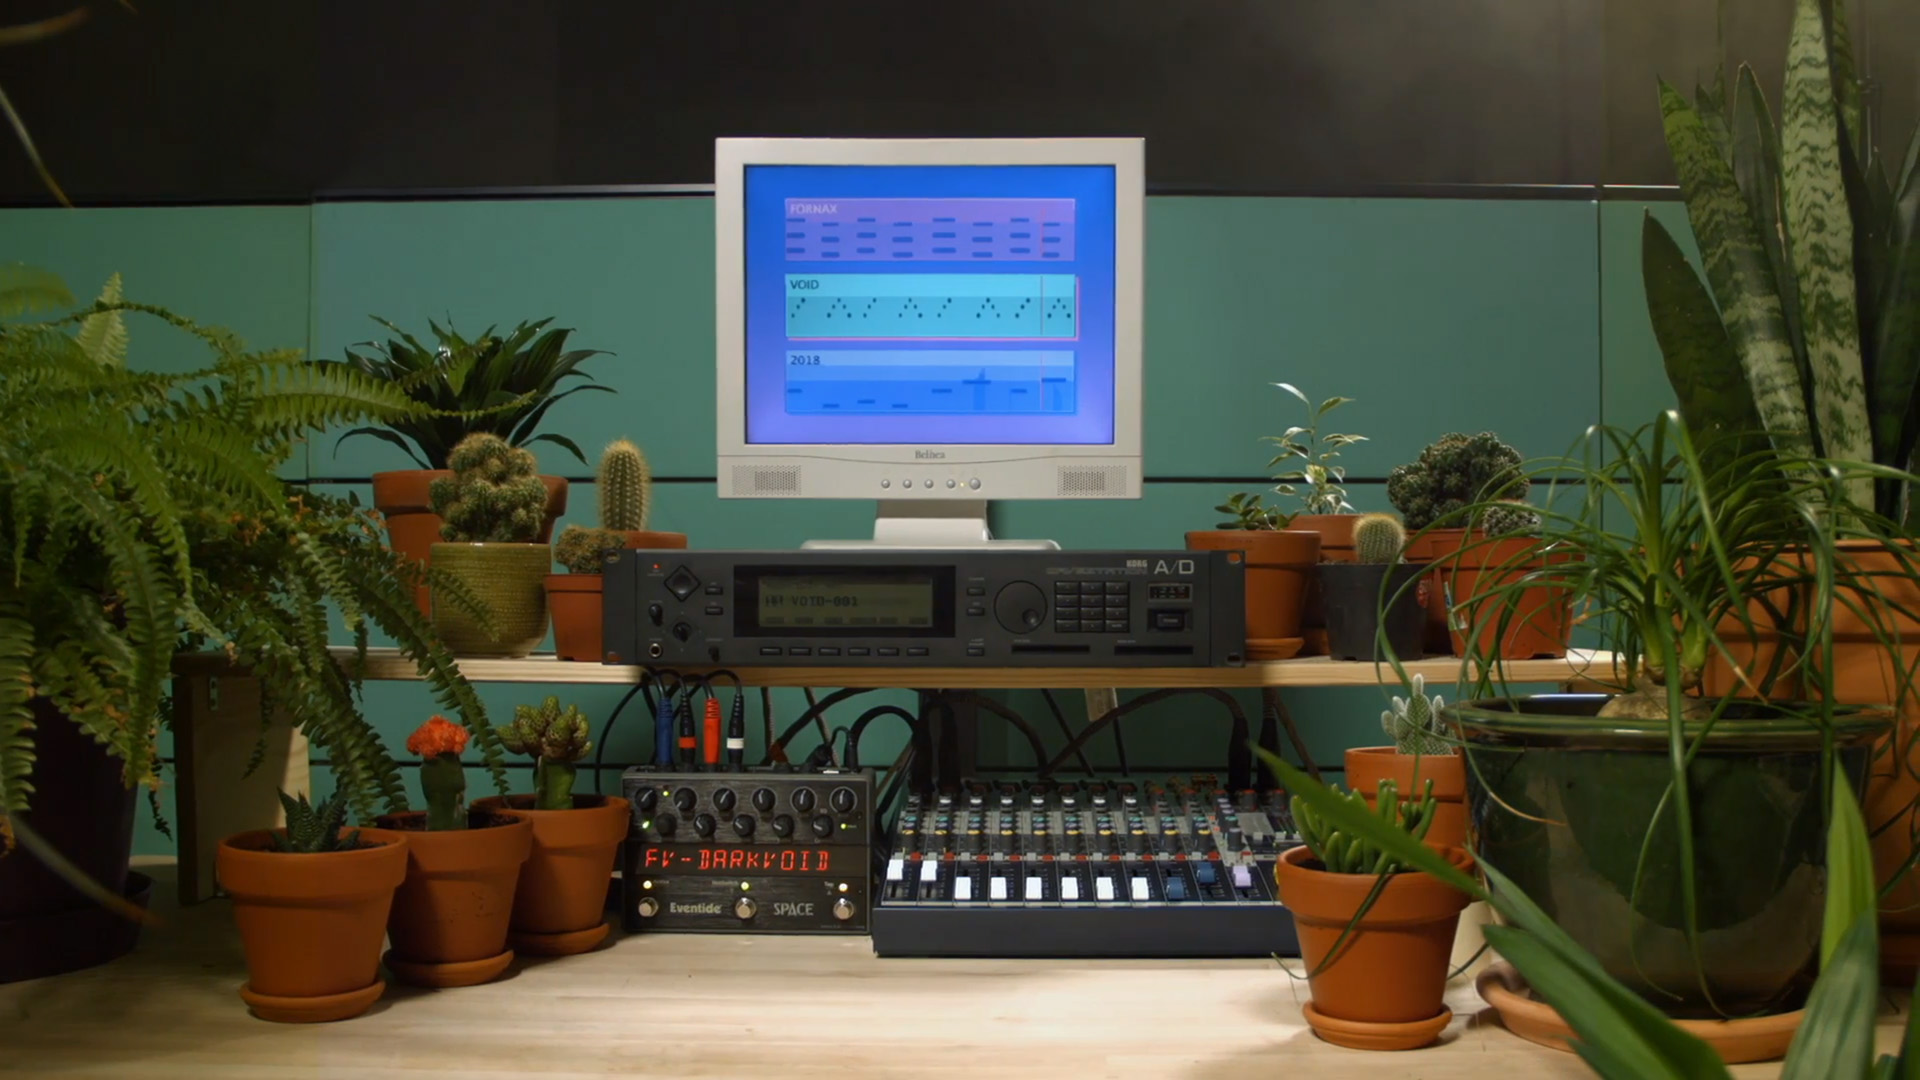 Image of a Korg WaveStation A/D synthesizer, an Eventide Space Reverb device and a Soundcraft EFX8 mixer